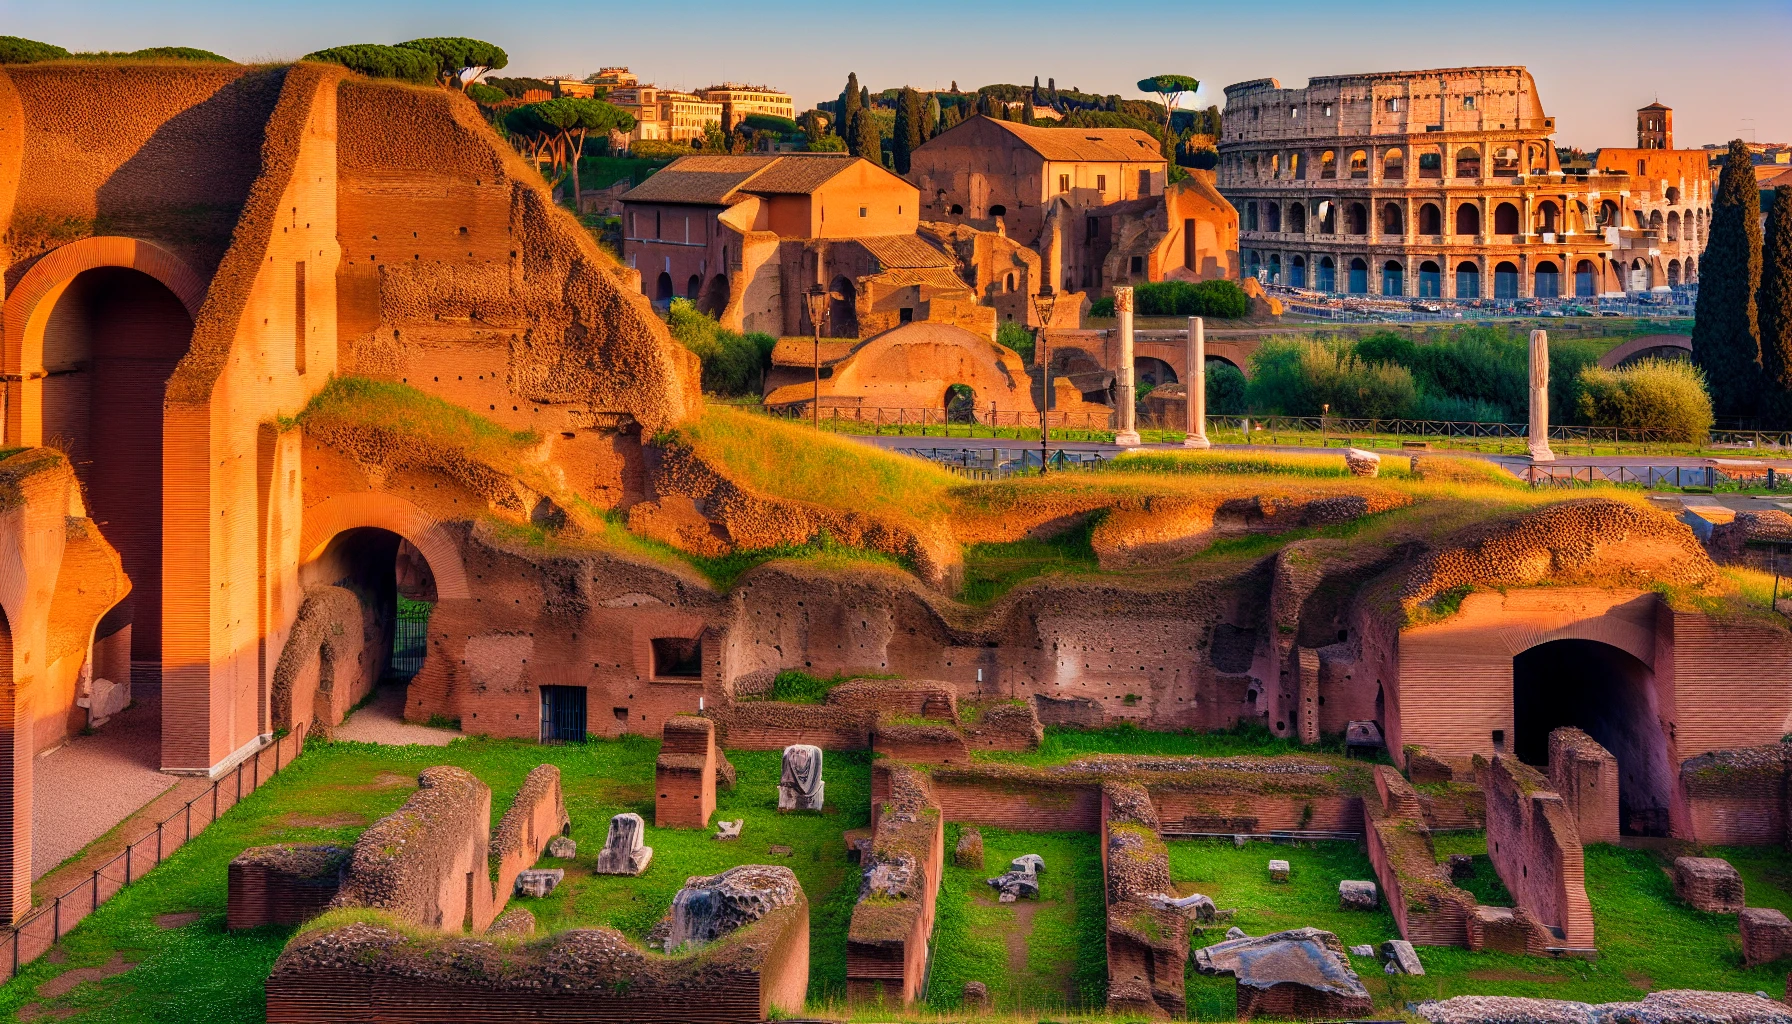 Ruins of Palatine Hill and the Roman Forum